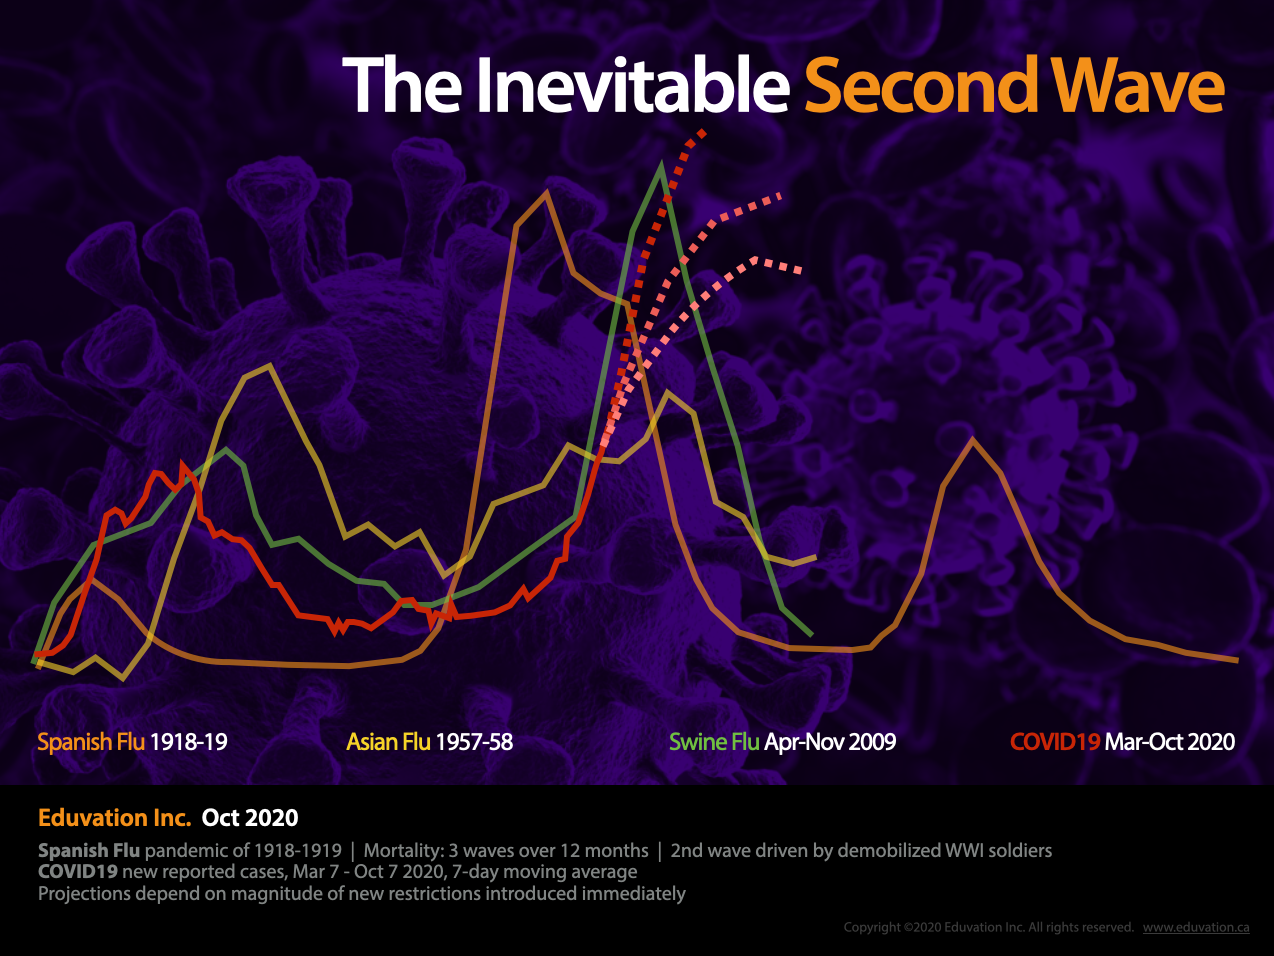 Many pandemics have had second or third waves worse than the first.